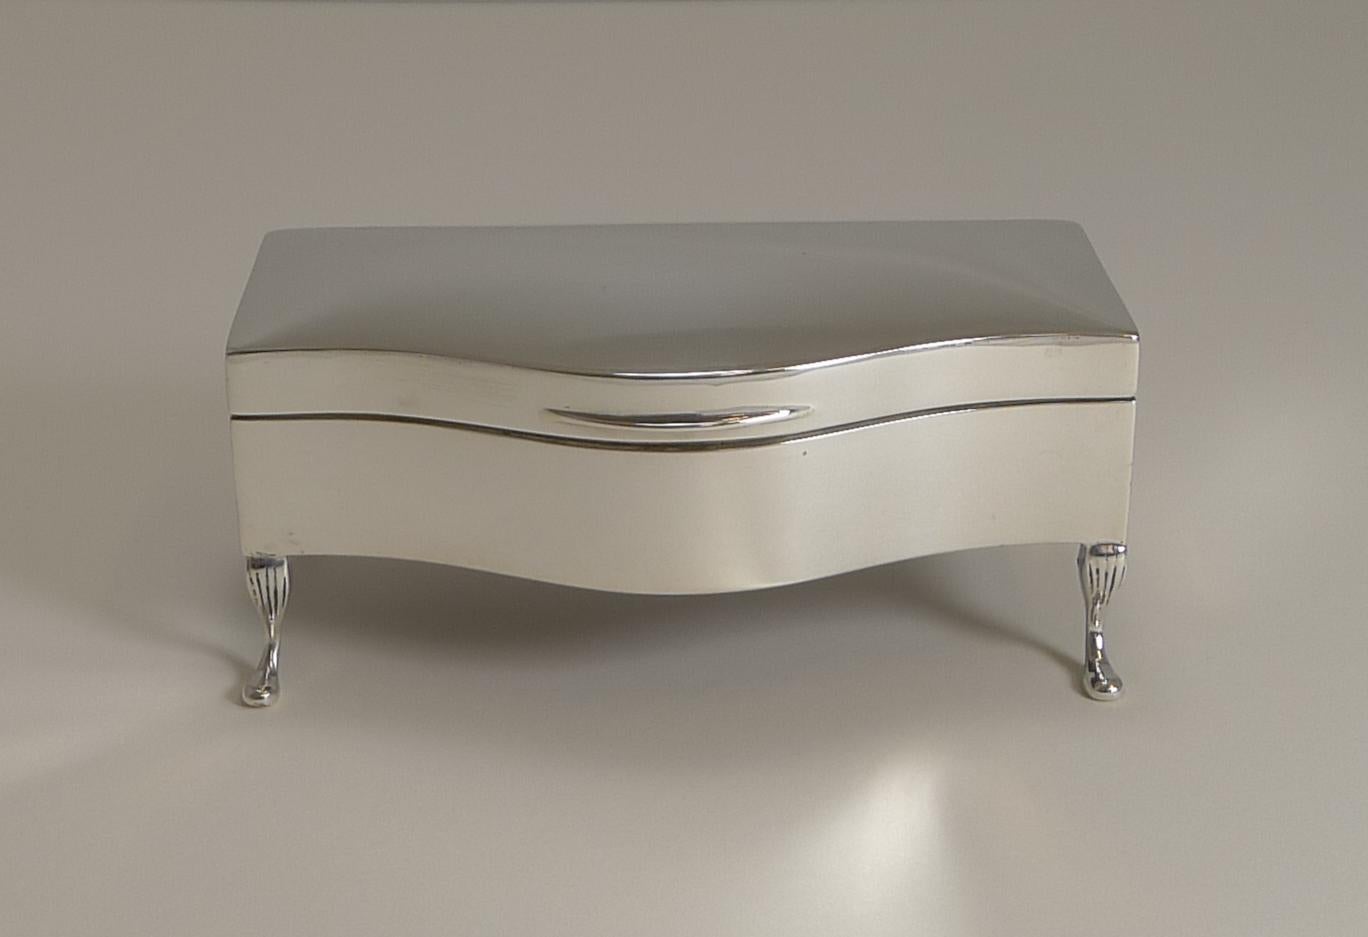 A truly elegant jewellery or ring box and in such superb condition. Made from English sterling silver, the box with its shaped front, stands on four stylish cabriole legs.

The lid fits well and once opened reveals a superb clean lined interior